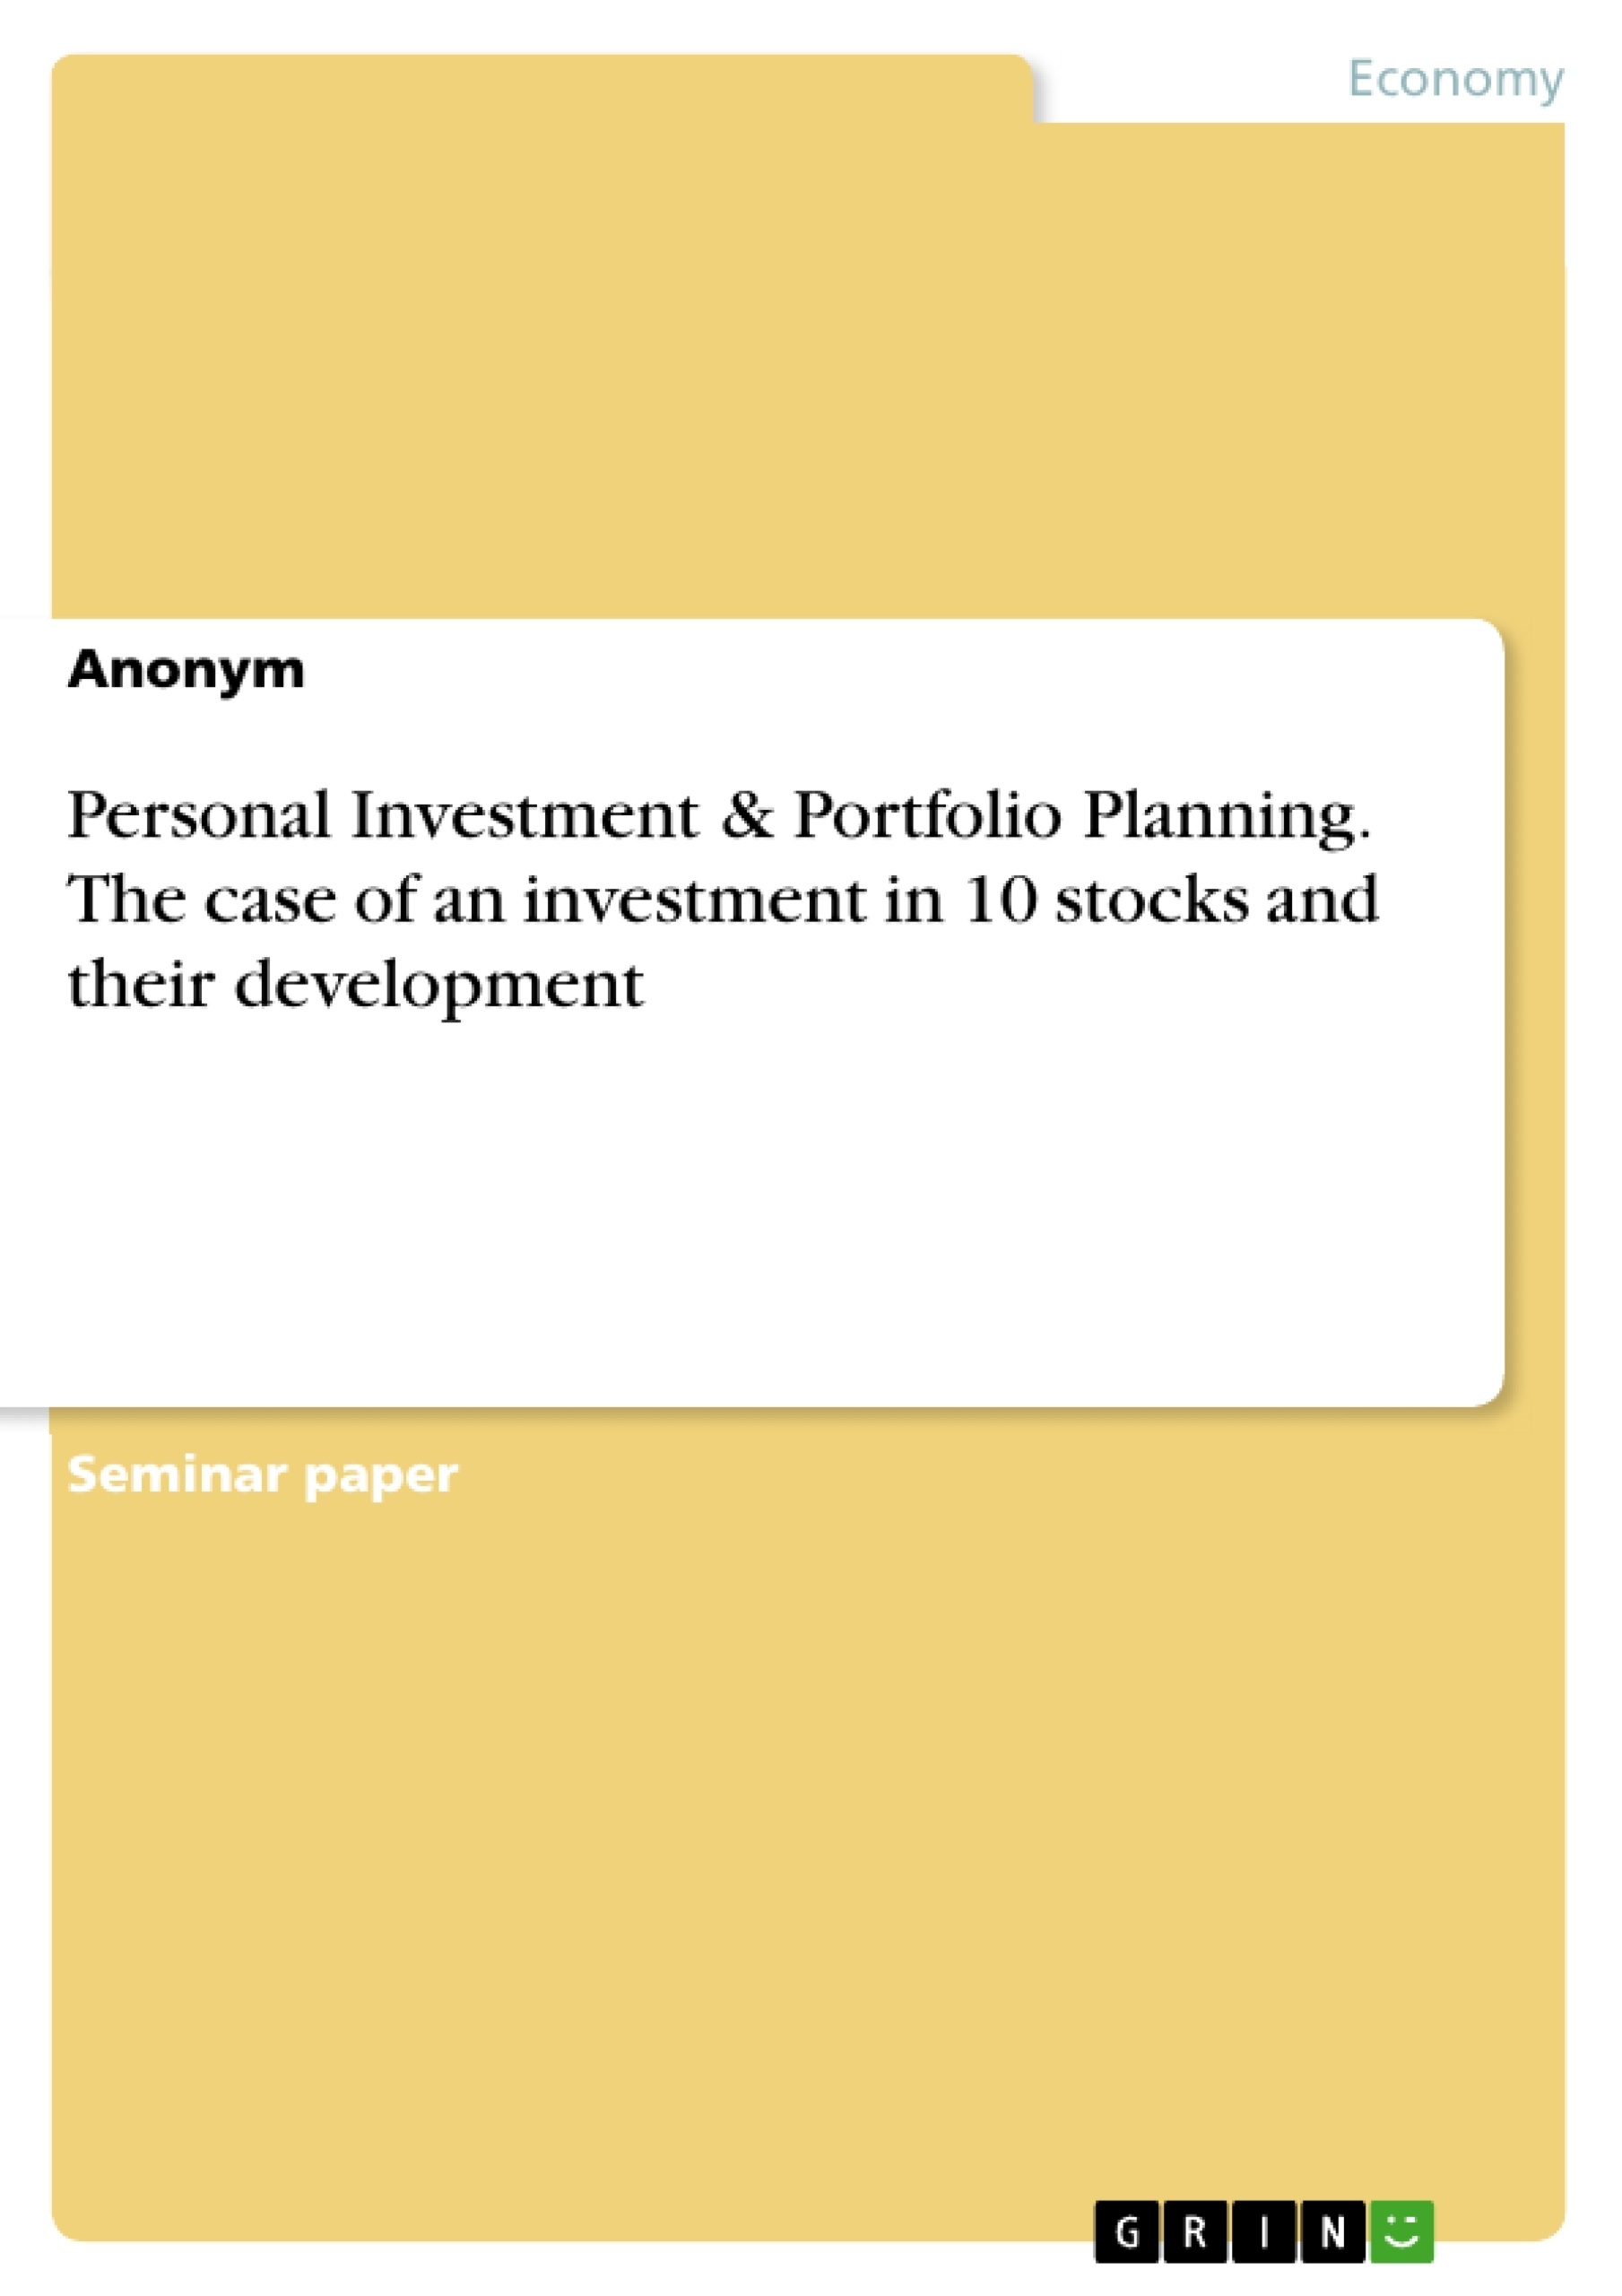 Title: Personal Investment & Portfolio Planning. The case of an investment in 10 stocks and their development